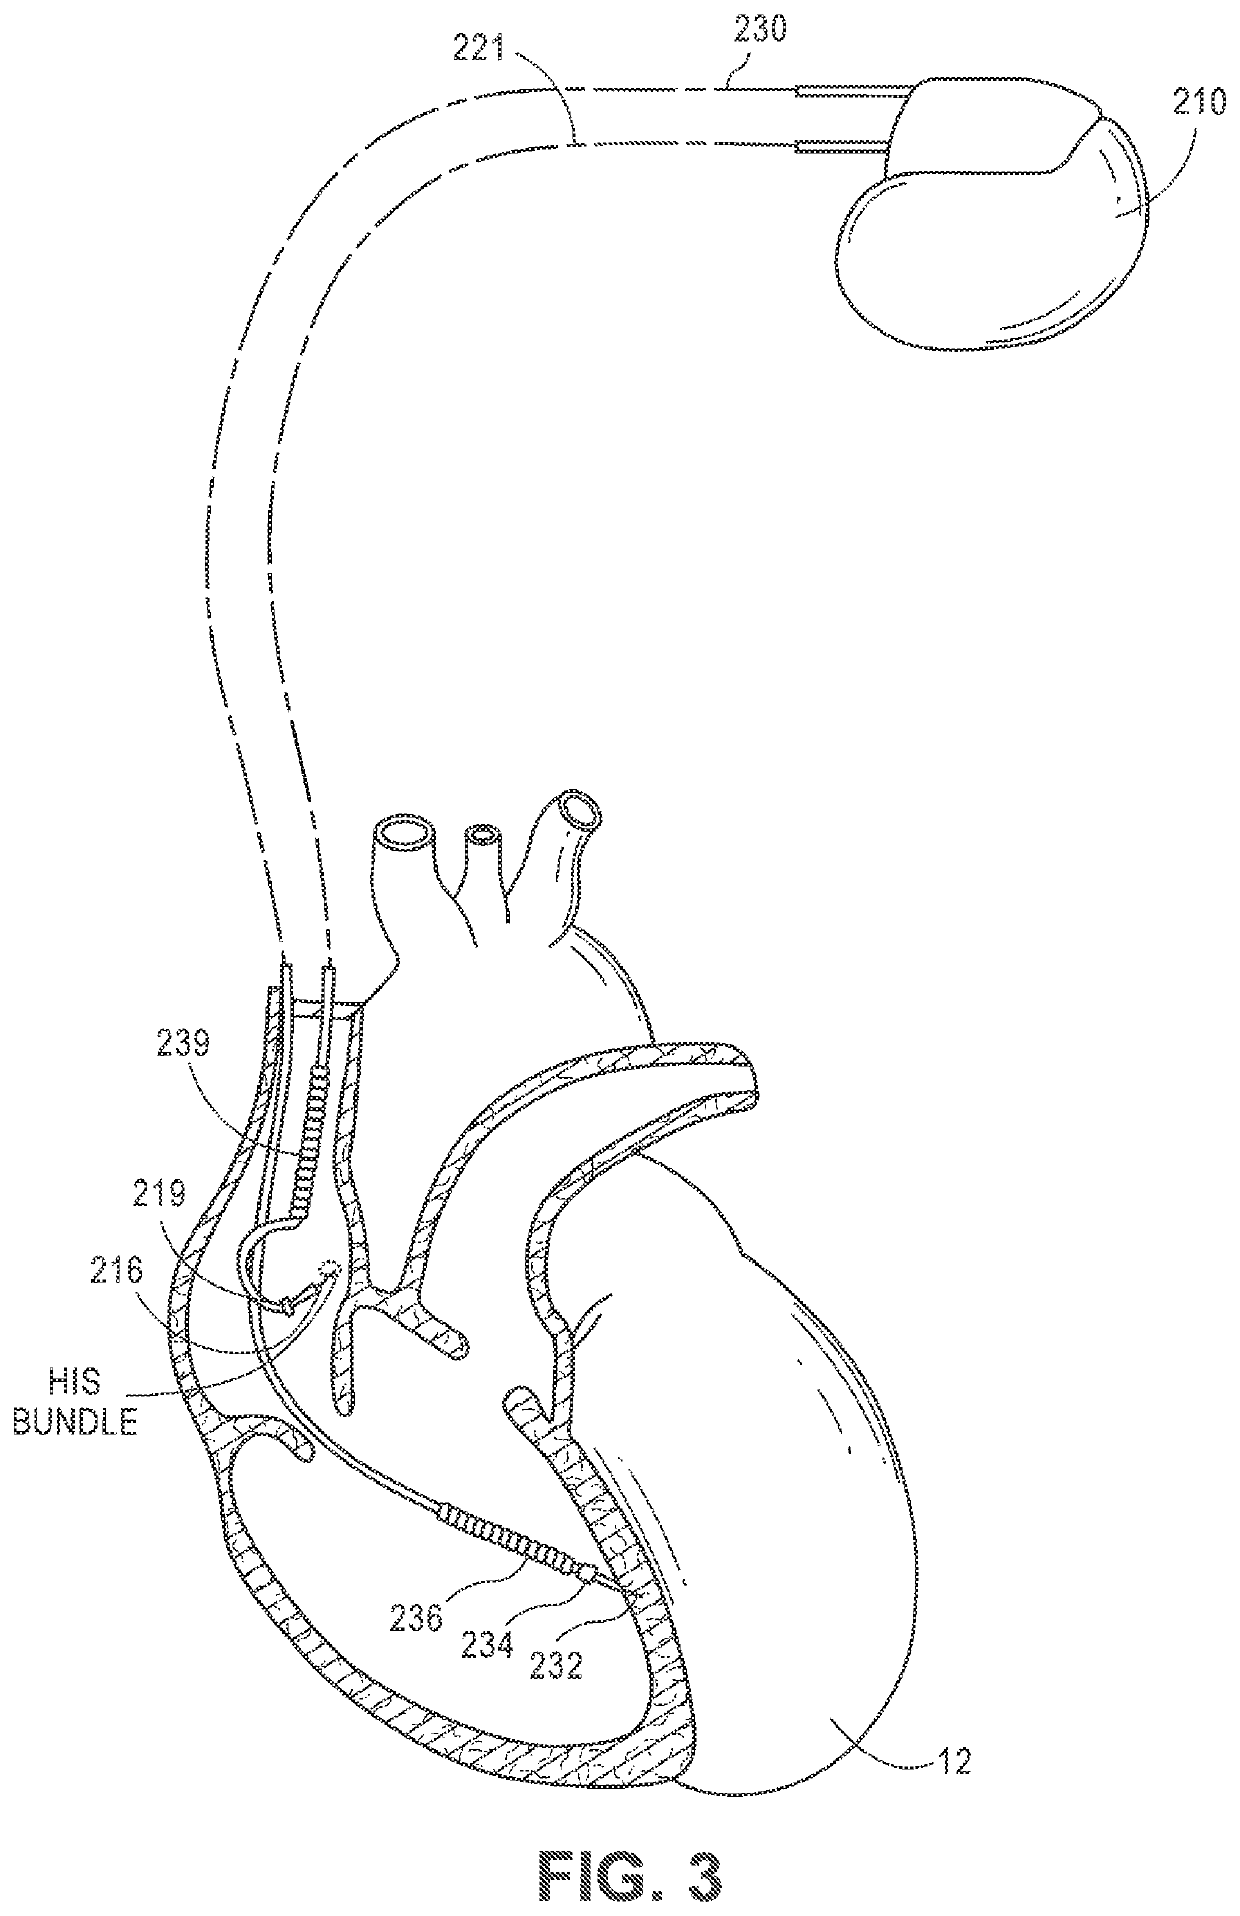 Systems and methods for automated capture threshold testing and associated his bundle pacing